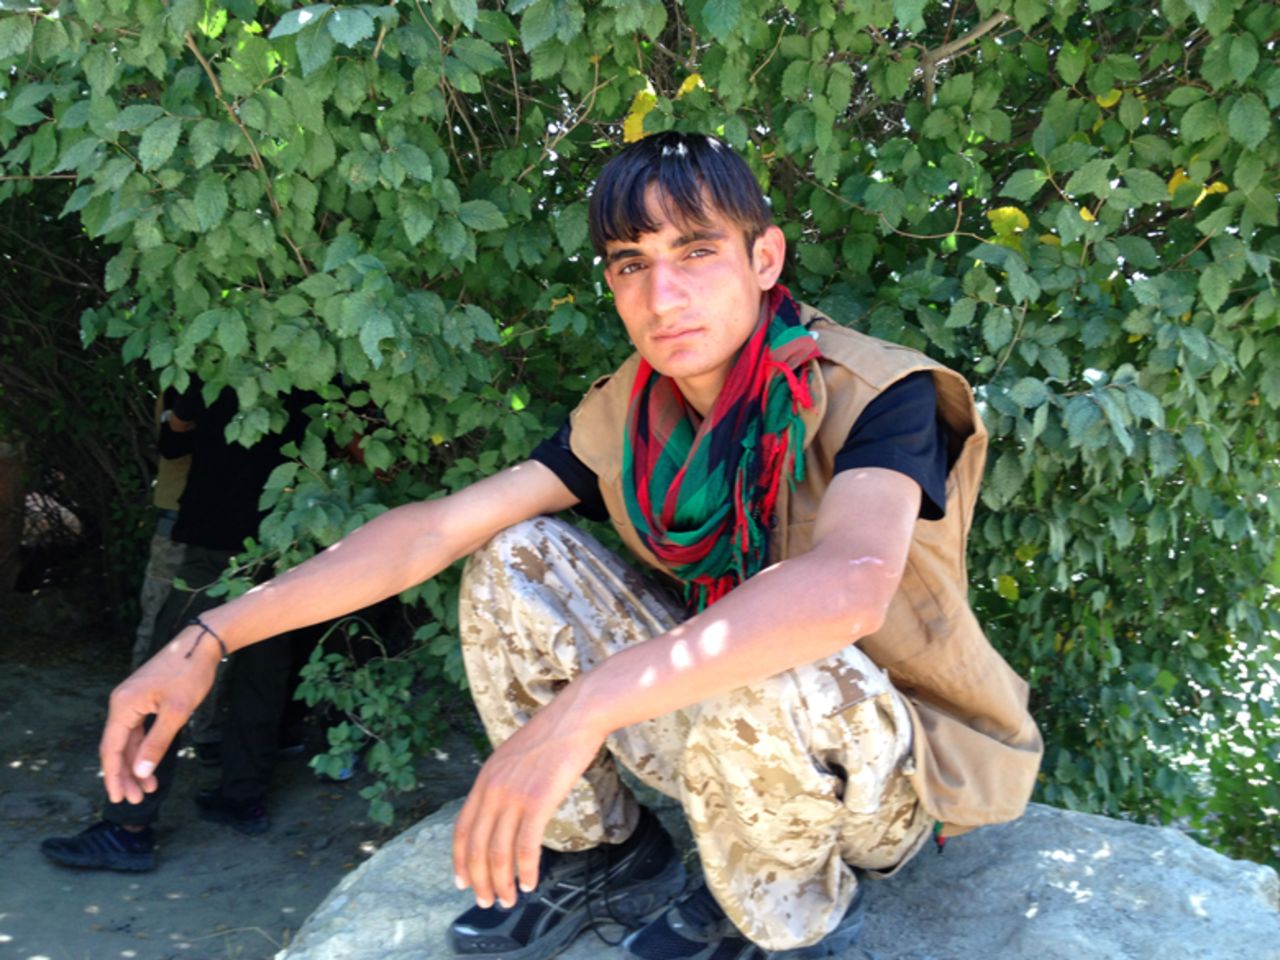 Nawab, 17, was also killed in the attack. A founding member of Skateistan, he eventually become a volunteer instructor, according to the <a href="http://www.skateistan.org/blog/tragic-loss" target="_blank" target="_blank">charity's website.</a>